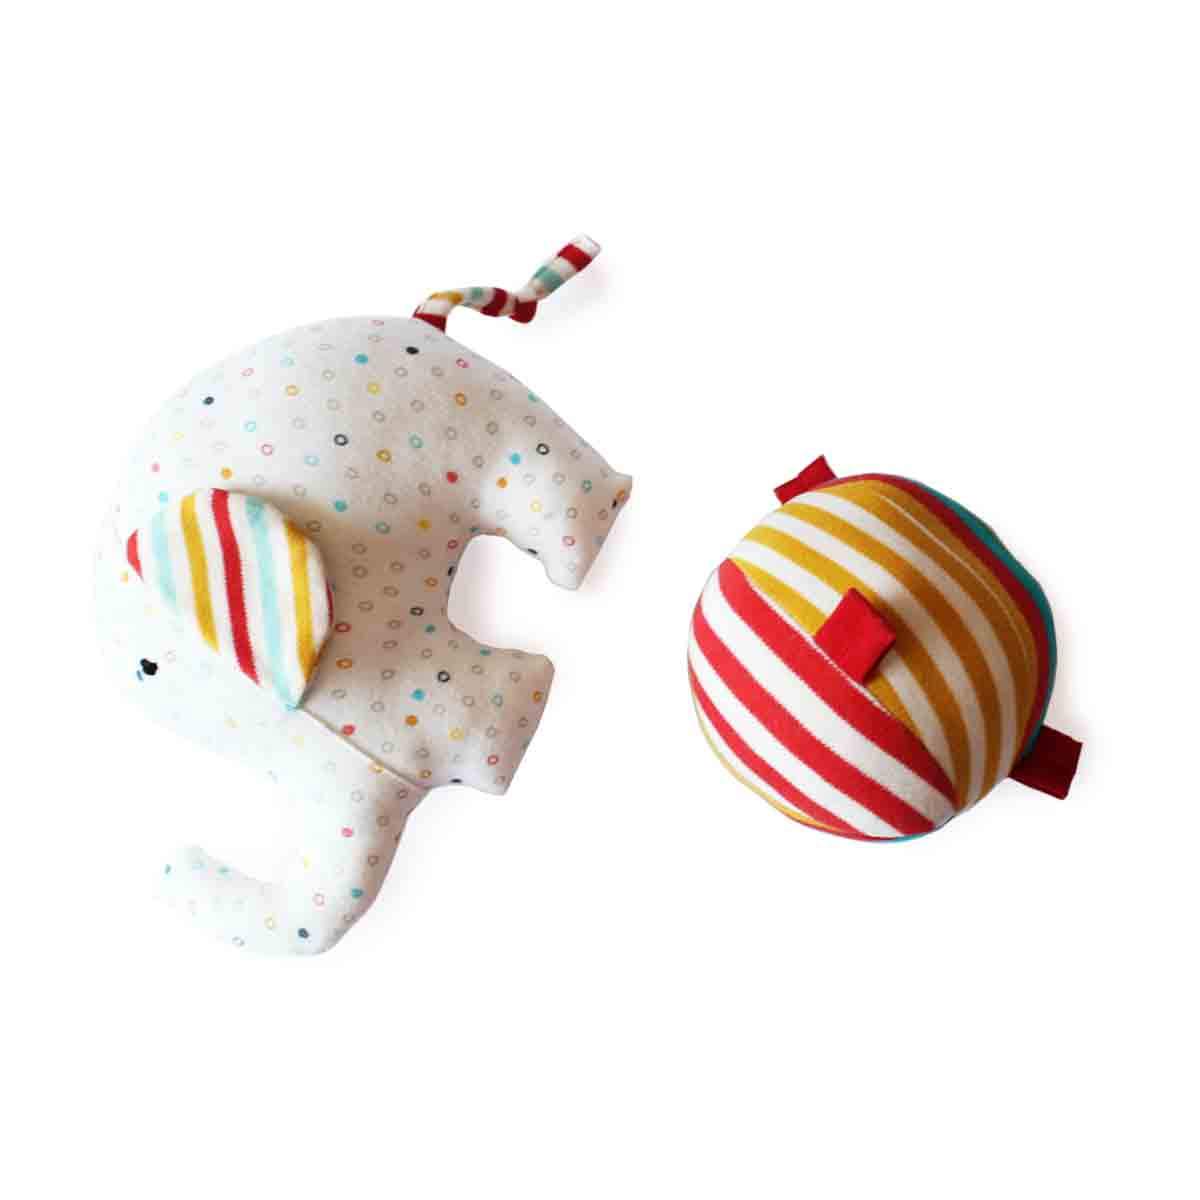 Shumee Ele And Ball Rattle Organic Plush Toy - BES-IN-PTE-C-0m-0074